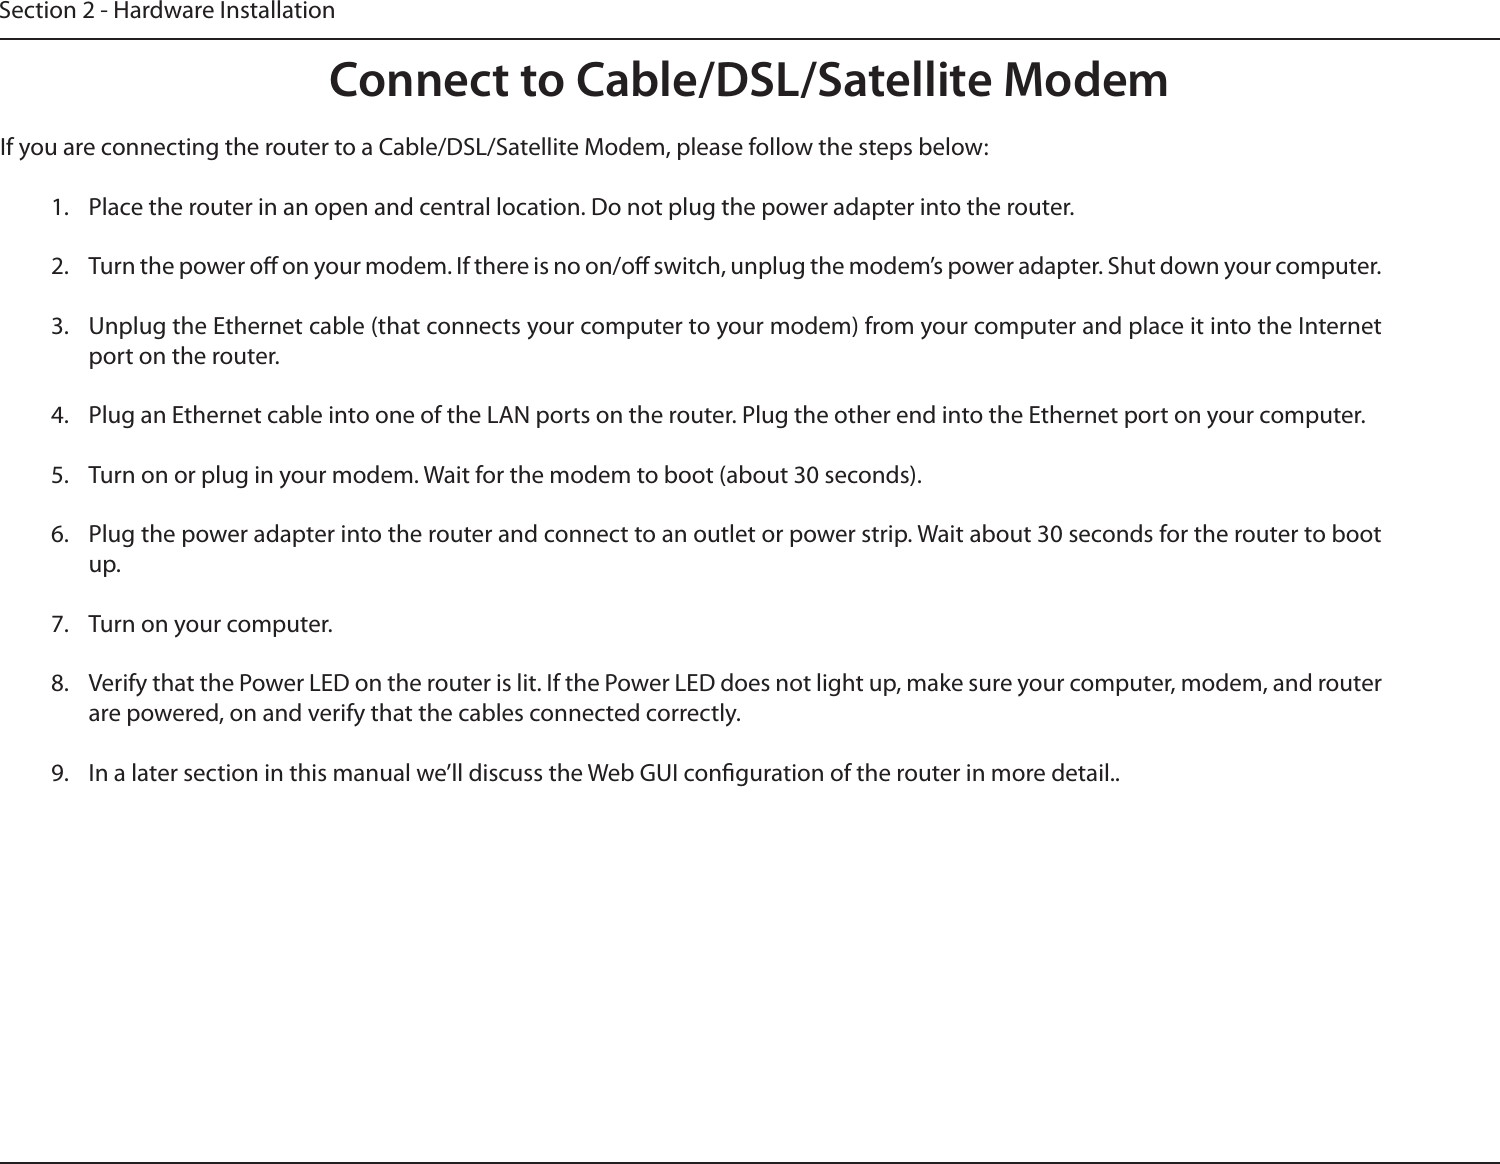 Section 2 - Hardware InstallationConnect to Cable/DSL/Satellite ModemIf you are connecting the router to a Cable/DSL/Satellite Modem, please follow the steps below:1.  Place the router in an open and central location. Do not plug the power adapter into the router.2.  Turn the power o on your modem. If there is no on/o switch, unplug the modem’s power adapter. Shut down your computer.3.  Unplug the Ethernet cable (that connects your computer to your modem) from your computer and place it into the Internet port on the router.4.  Plug an Ethernet cable into one of the LAN ports on the router. Plug the other end into the Ethernet port on your computer.5.  Turn on or plug in your modem. Wait for the modem to boot (about 30 seconds).6.  Plug the power adapter into the router and connect to an outlet or power strip. Wait about 30 seconds for the router to boot up.7.  Turn on your computer.8.  Verify that the Power LED on the router is lit. If the Power LED does not light up, make sure your computer, modem, and router are powered, on and verify that the cables connected correctly.9.  In a later section in this manual we’ll discuss the Web GUI conguration of the router in more detail..